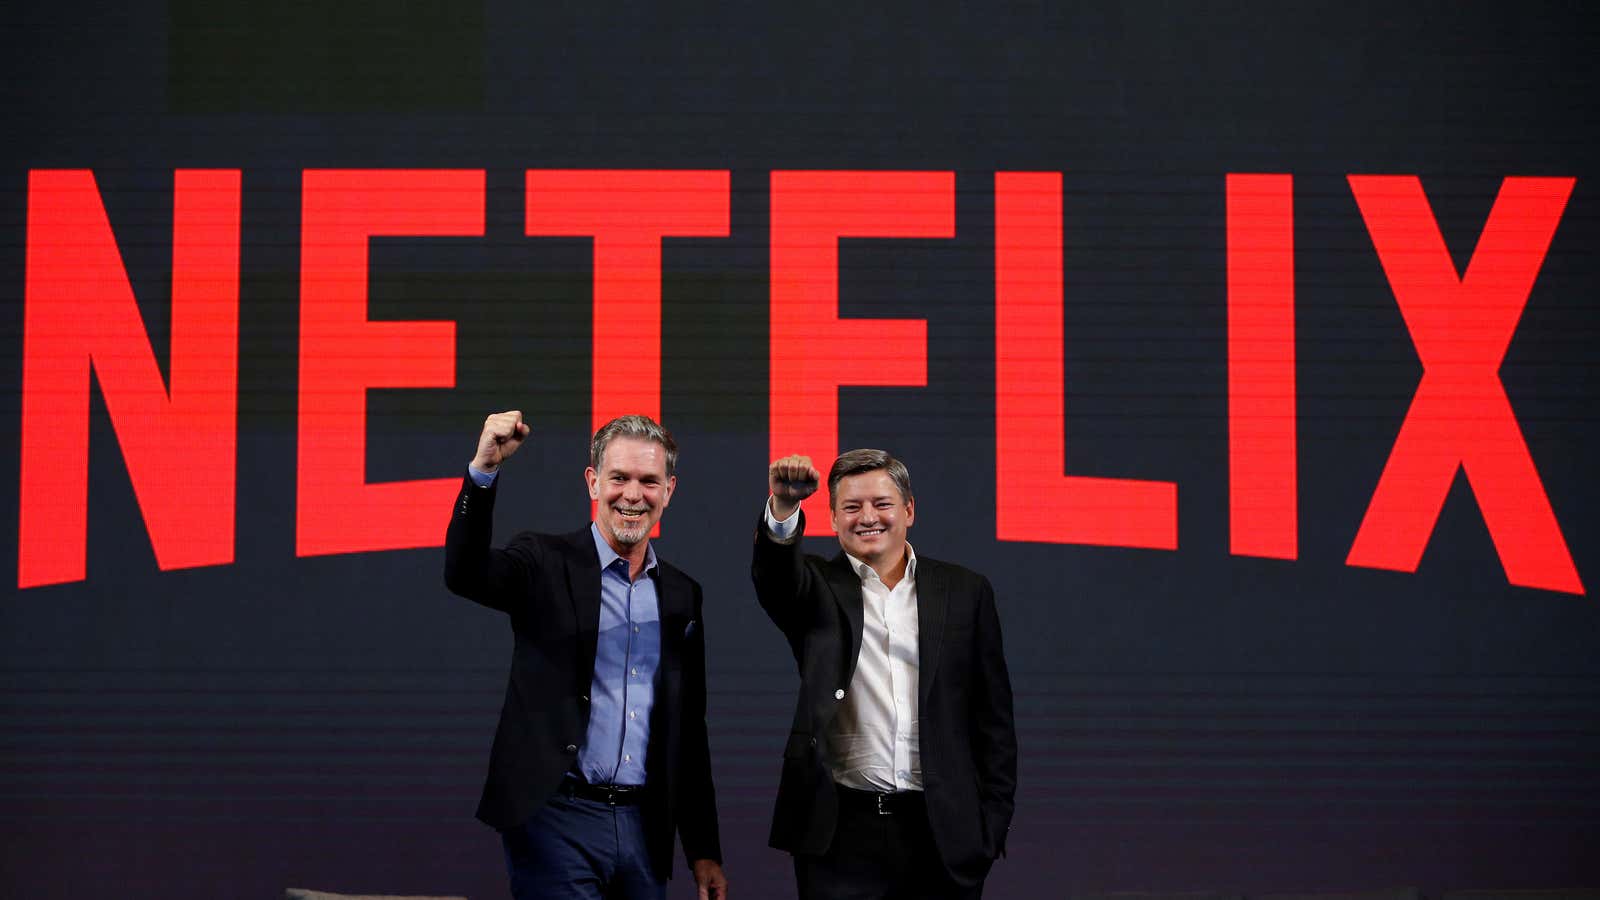 Netflix co-CEOs Reed Hastings and Ted Sarandos aspire to build a “culture of transparency.”